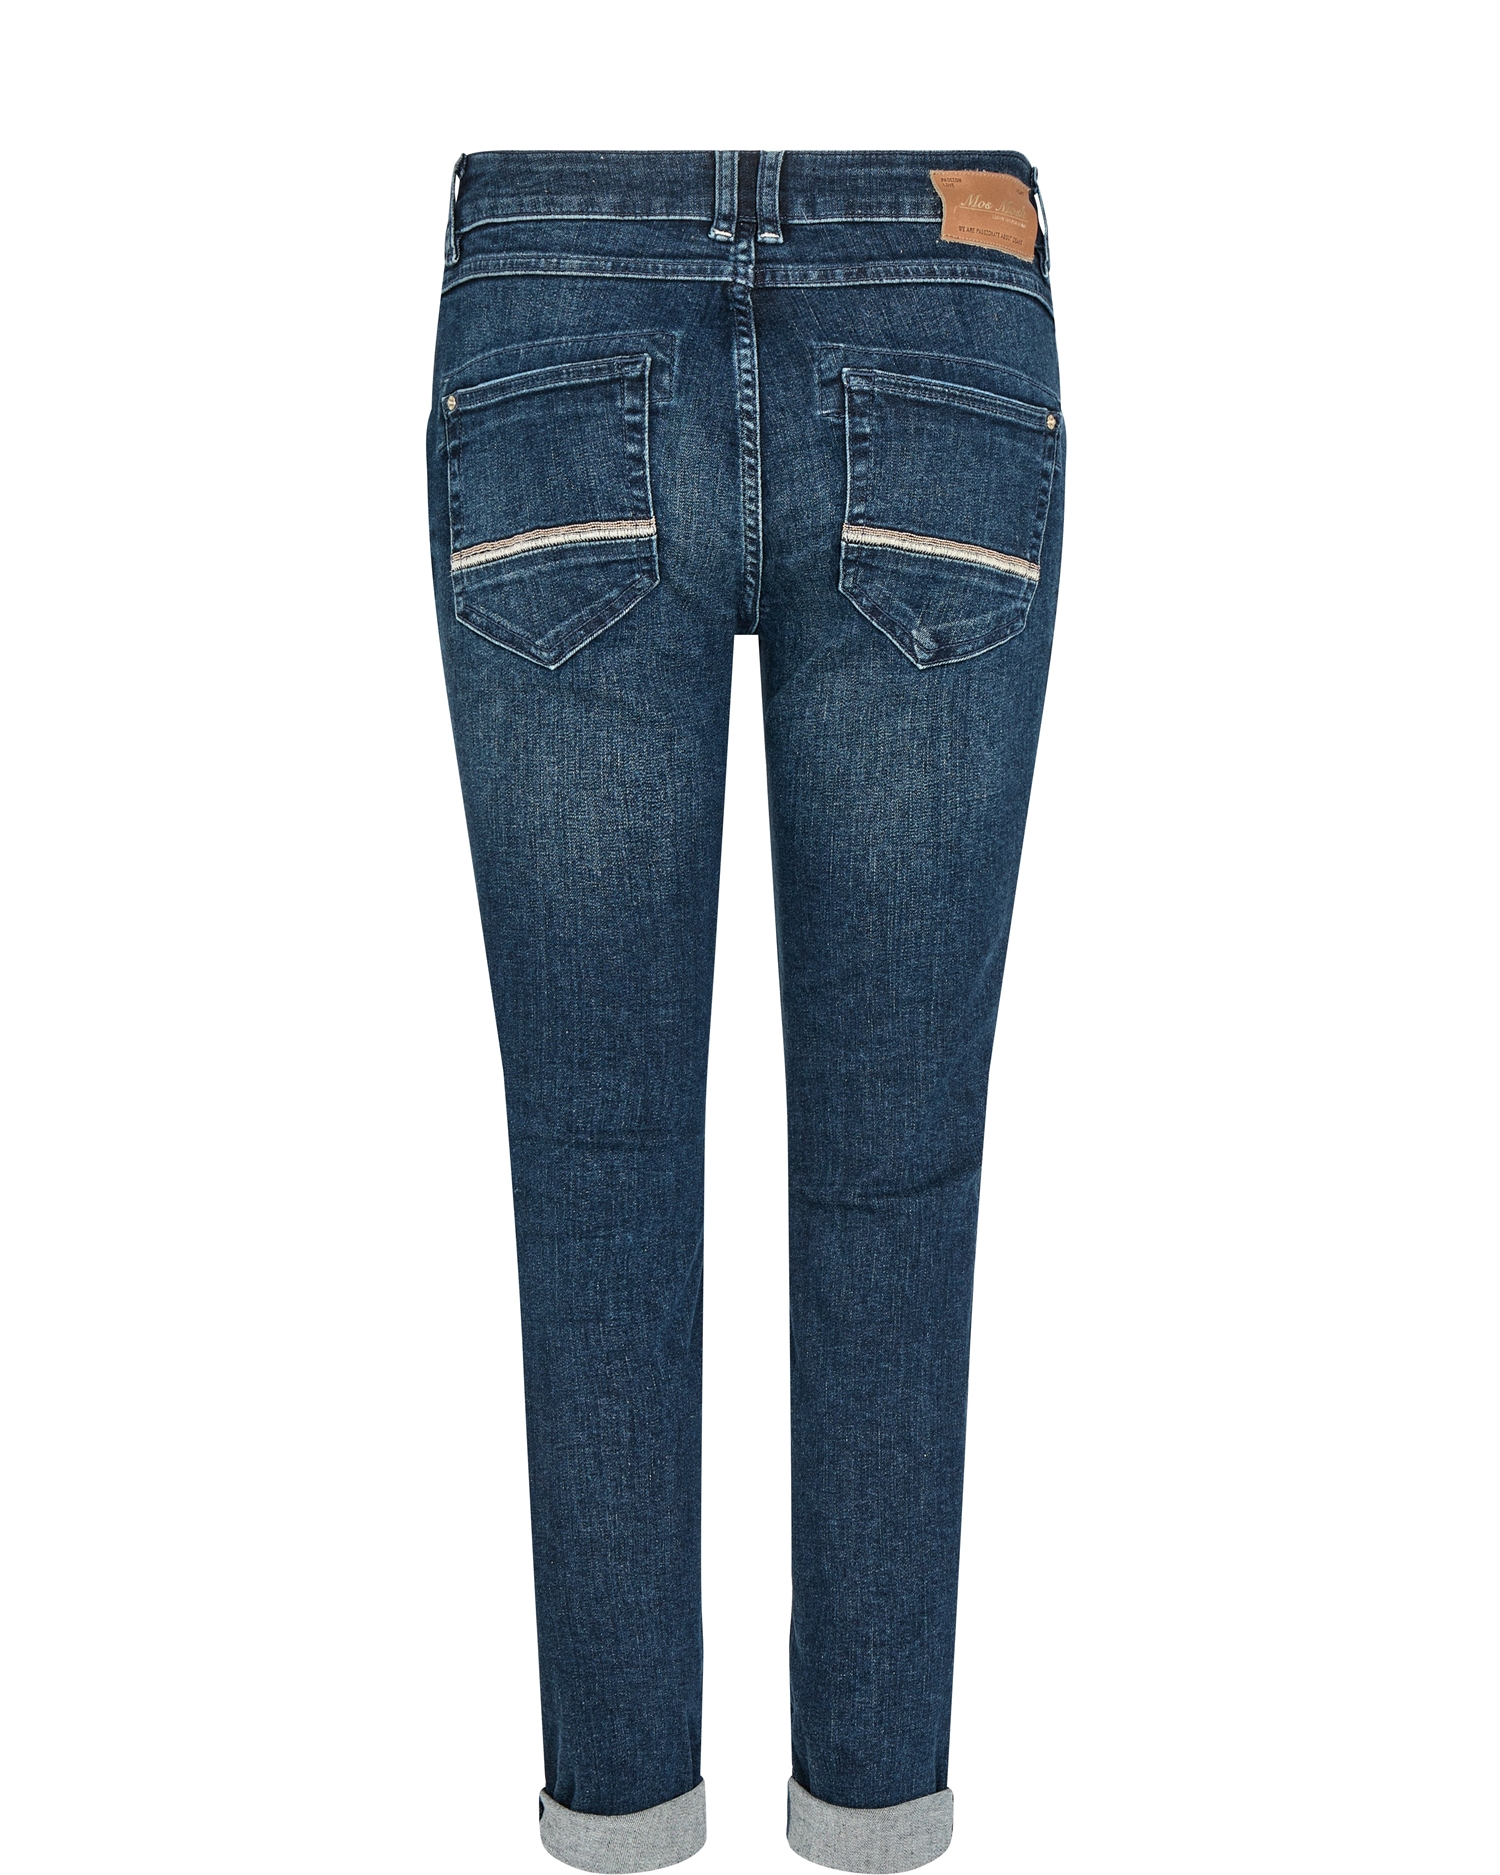 Naomi Cool Jeans Blue - Shop Mos Mosh Nyheder Her